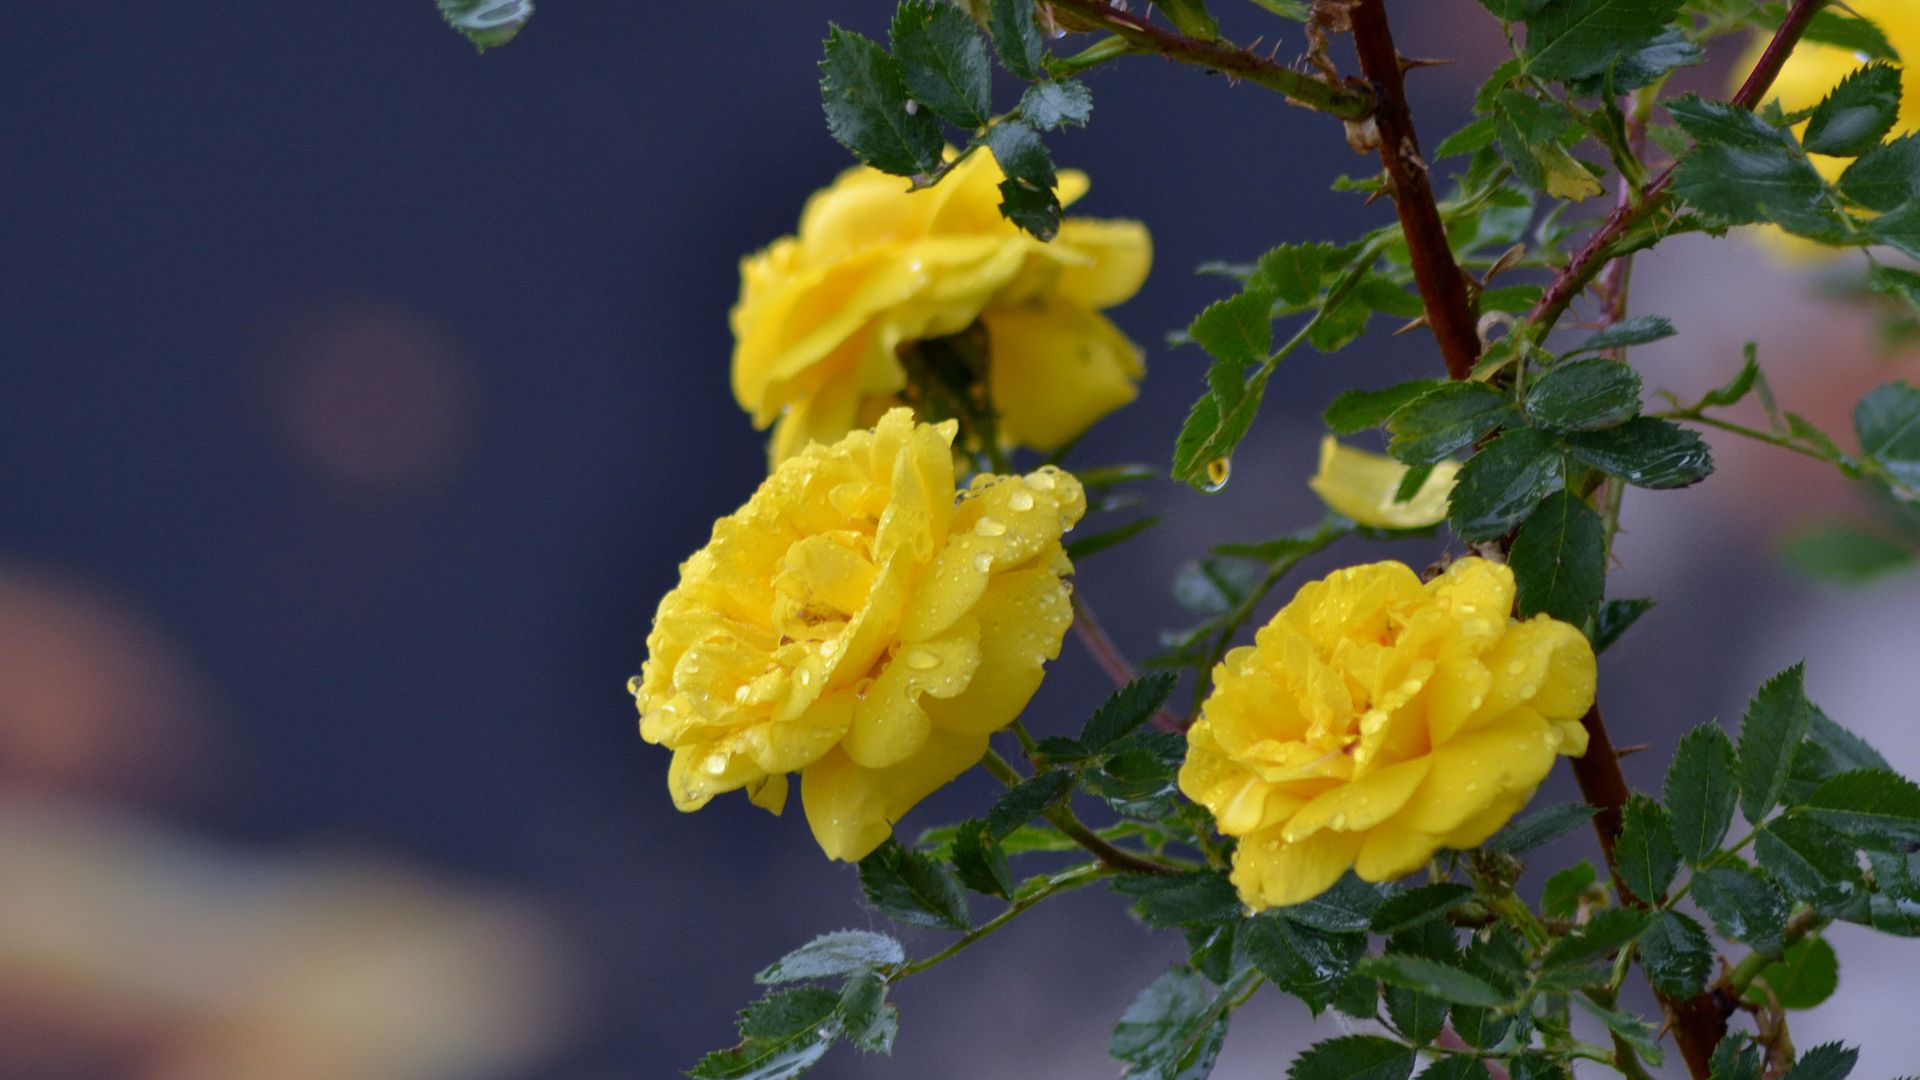 Wallpaper Flowers roses branch drops yellow roses